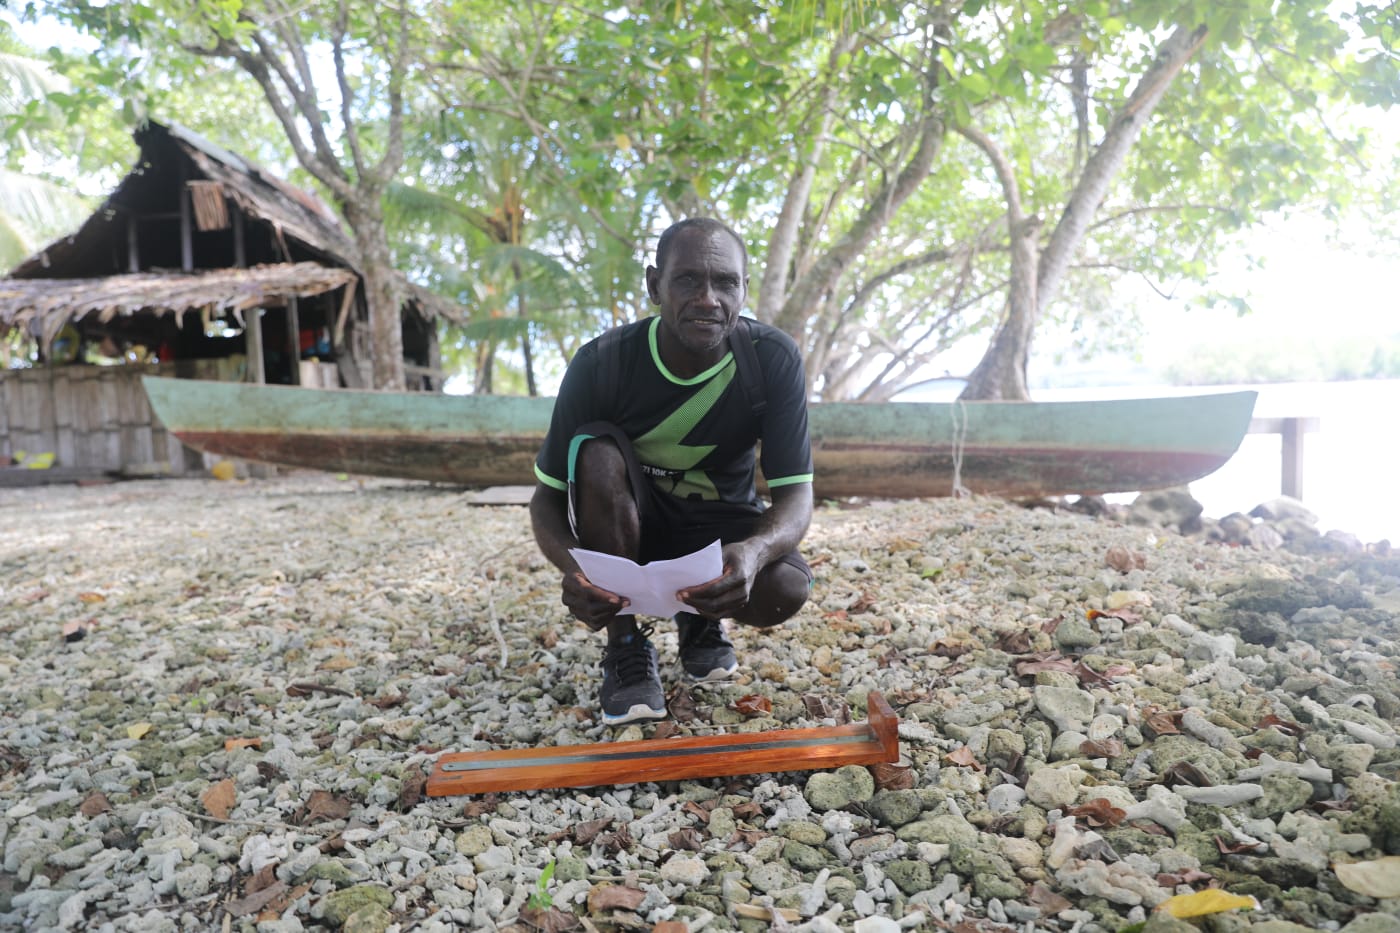 Sese, a fisher in Solomon Islands